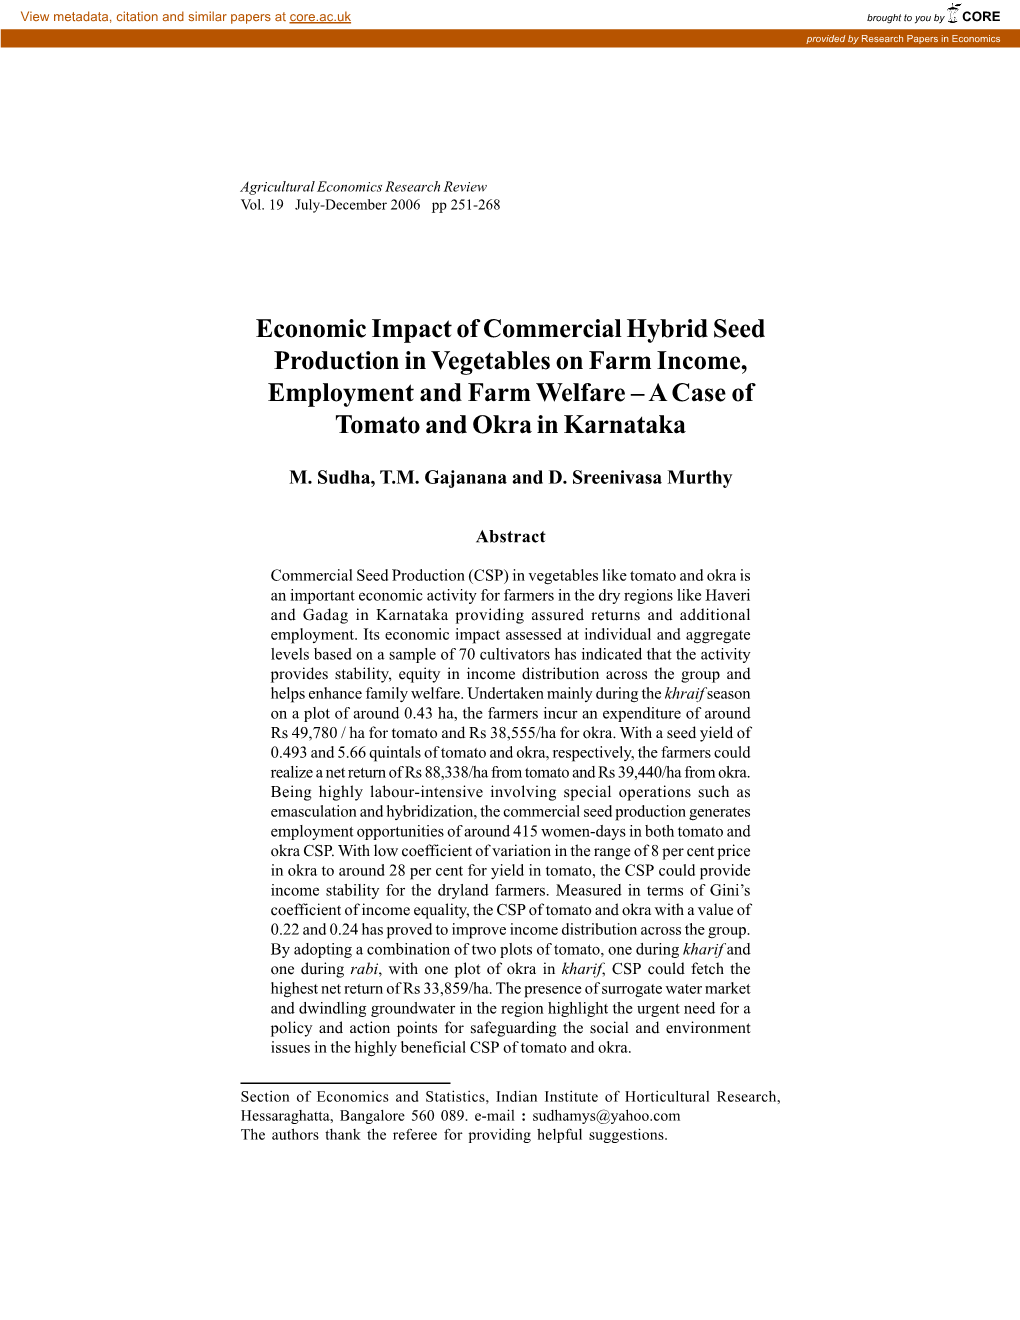 Economic Impact of Commercial Hybrid Seed Production in Vegetables on Farm Income, Employment and Farm Welfare – a Case of Tomato and Okra in Karnataka